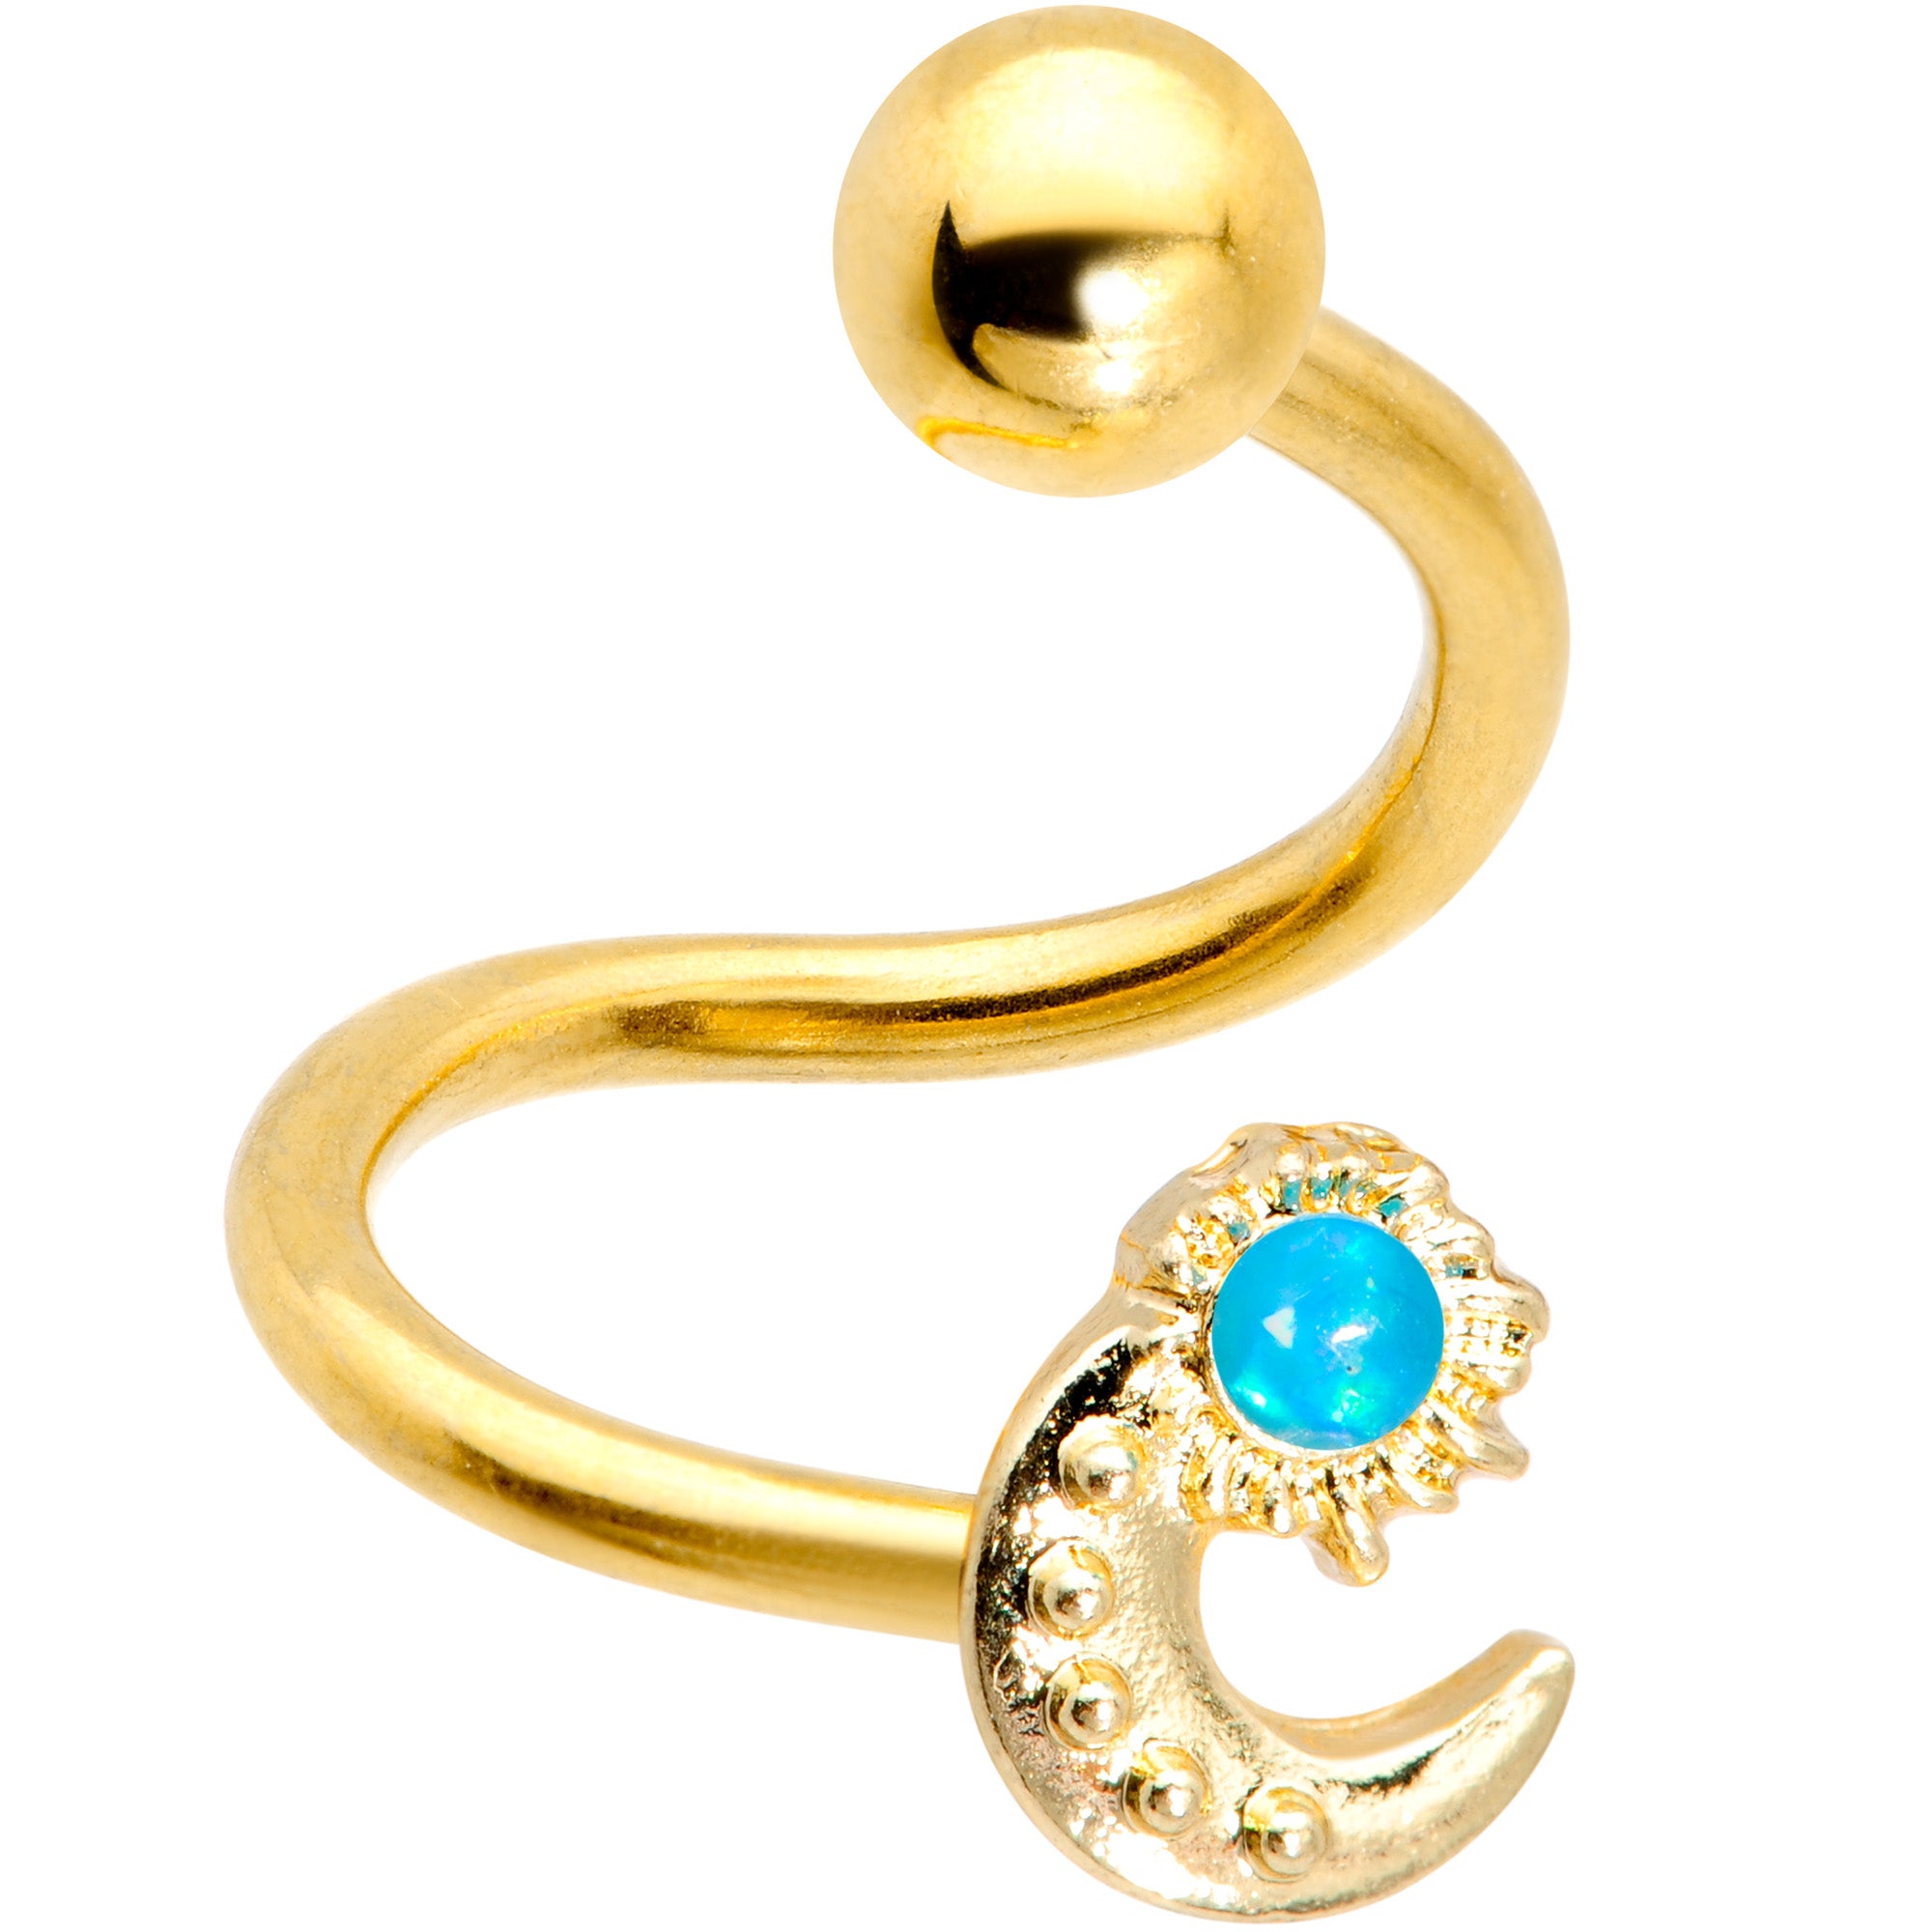 14 Gauge 3/8 Blue Faux Opal Gold Tone Moon Spiral Twister Belly Ring